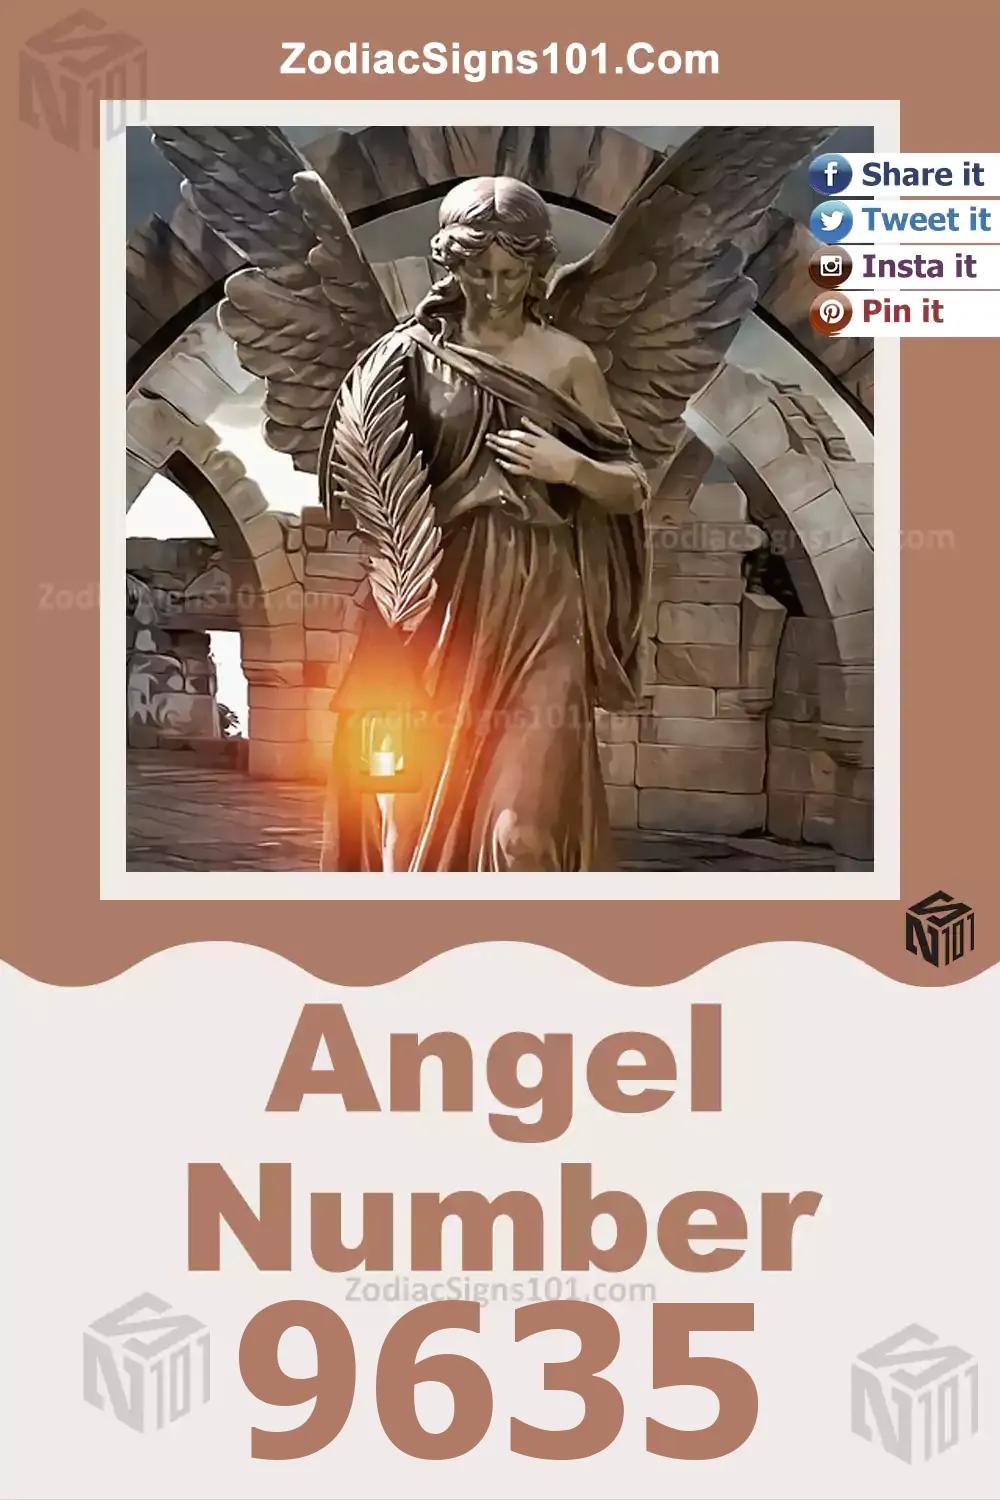 9635 Angel Number Meaning